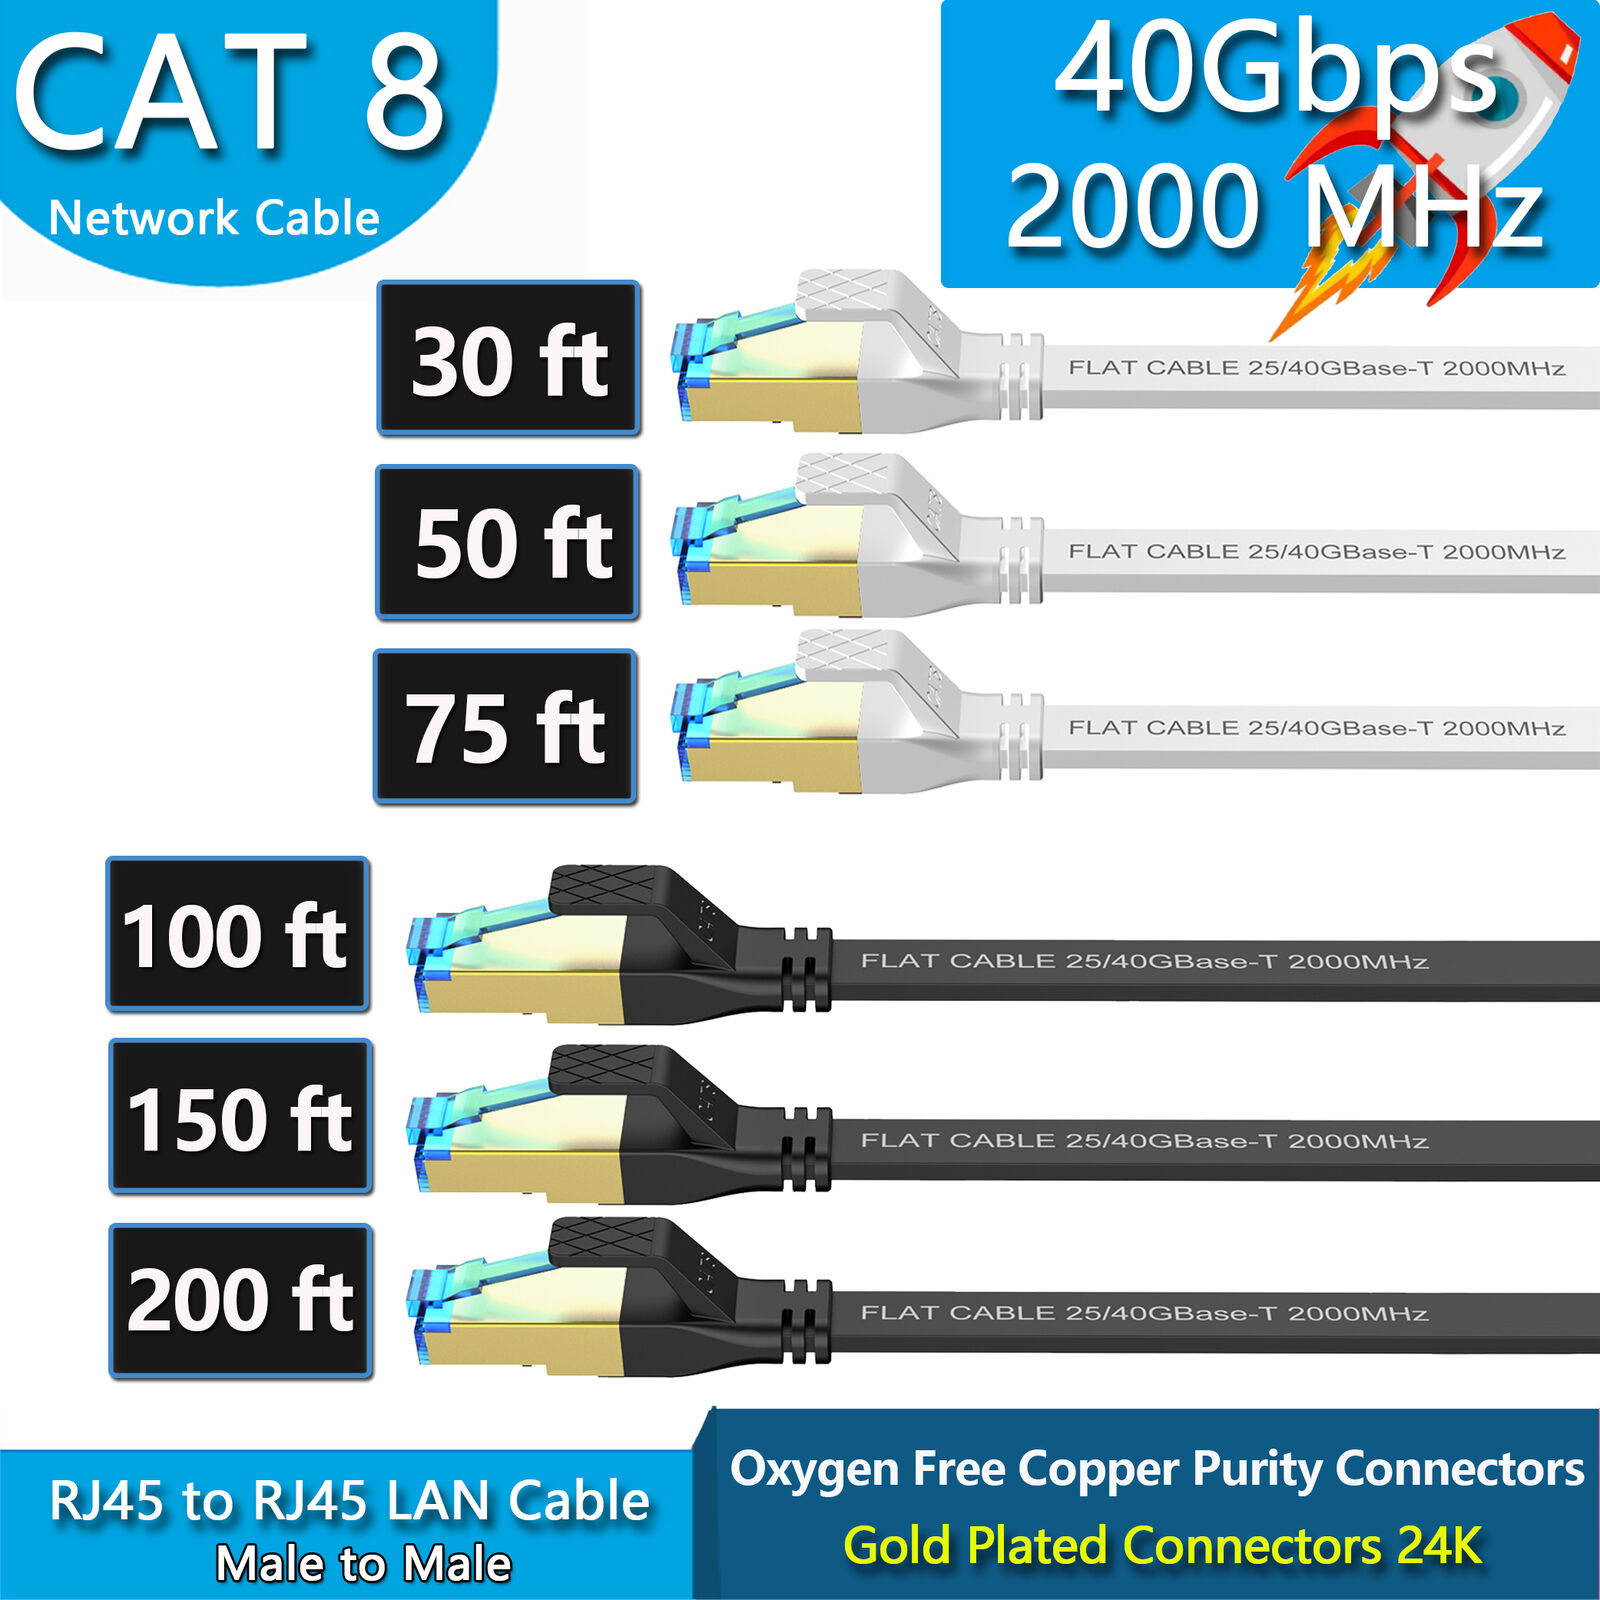 30FT - 200FT Heavy Duty Cat8 Ethernet Cable Super Speed 40Gbps/2000Mhz RJ45 cord